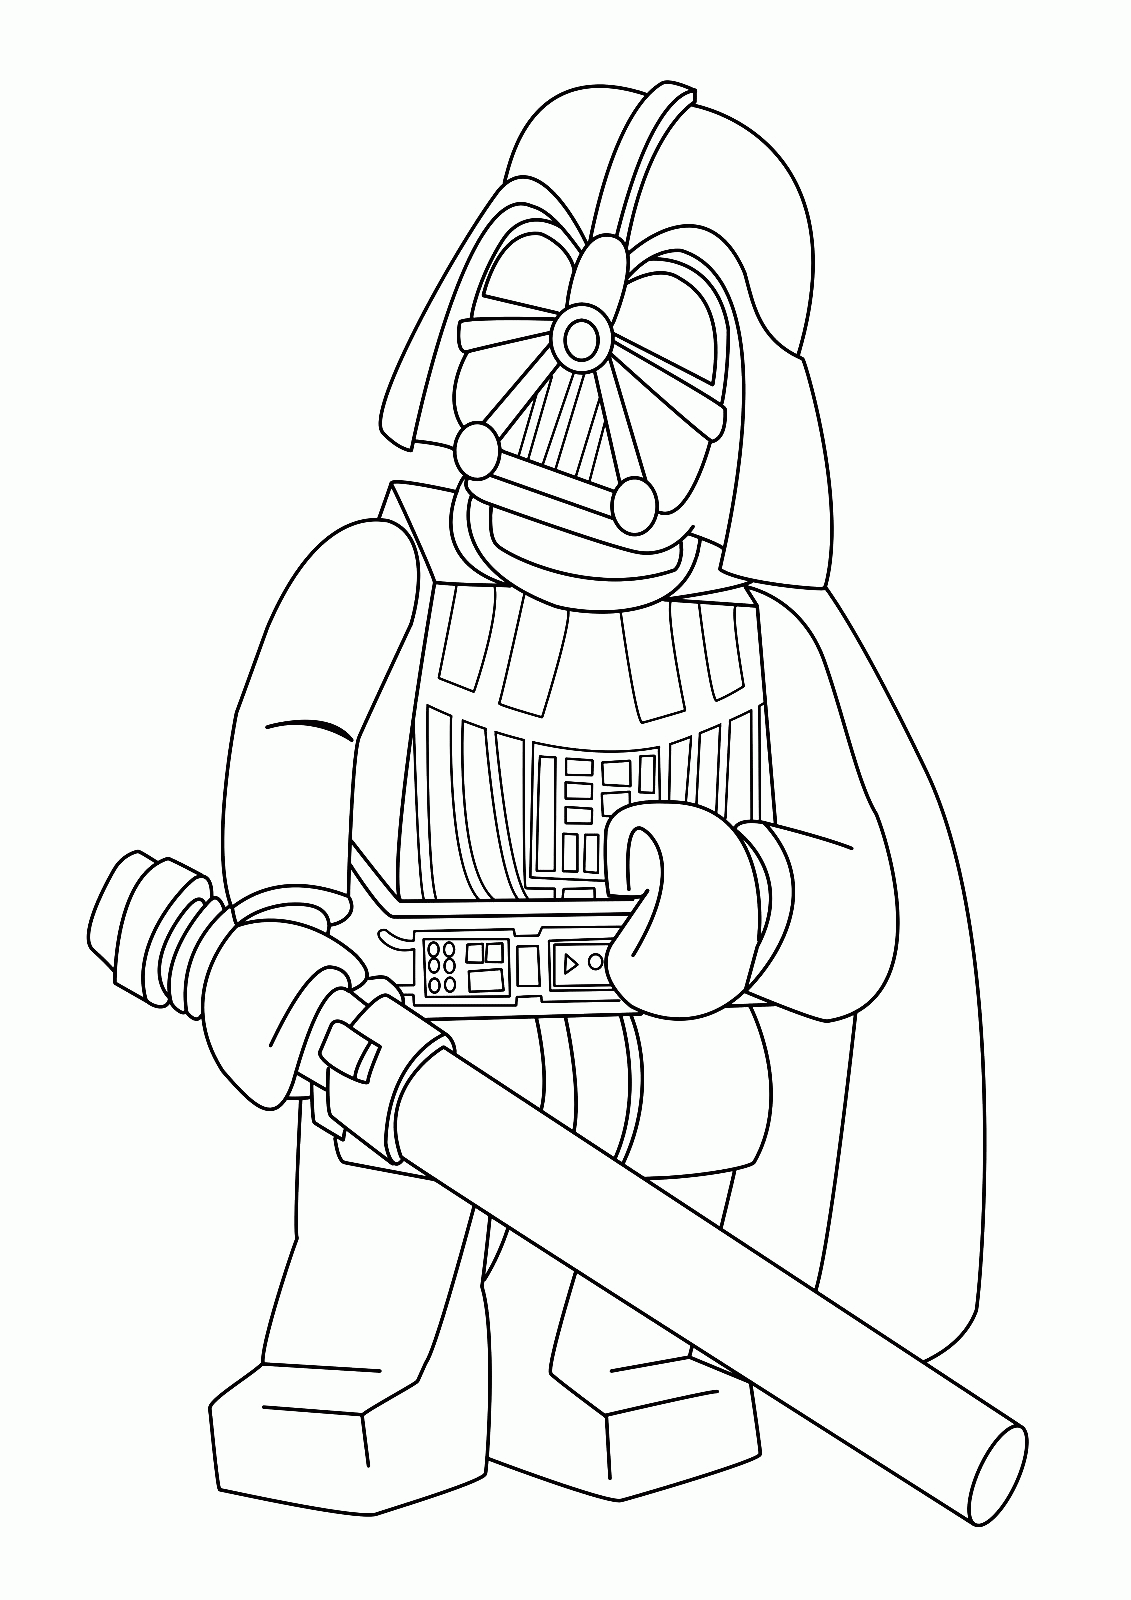 Kylo Ren Coloring Pages - Coloring Home